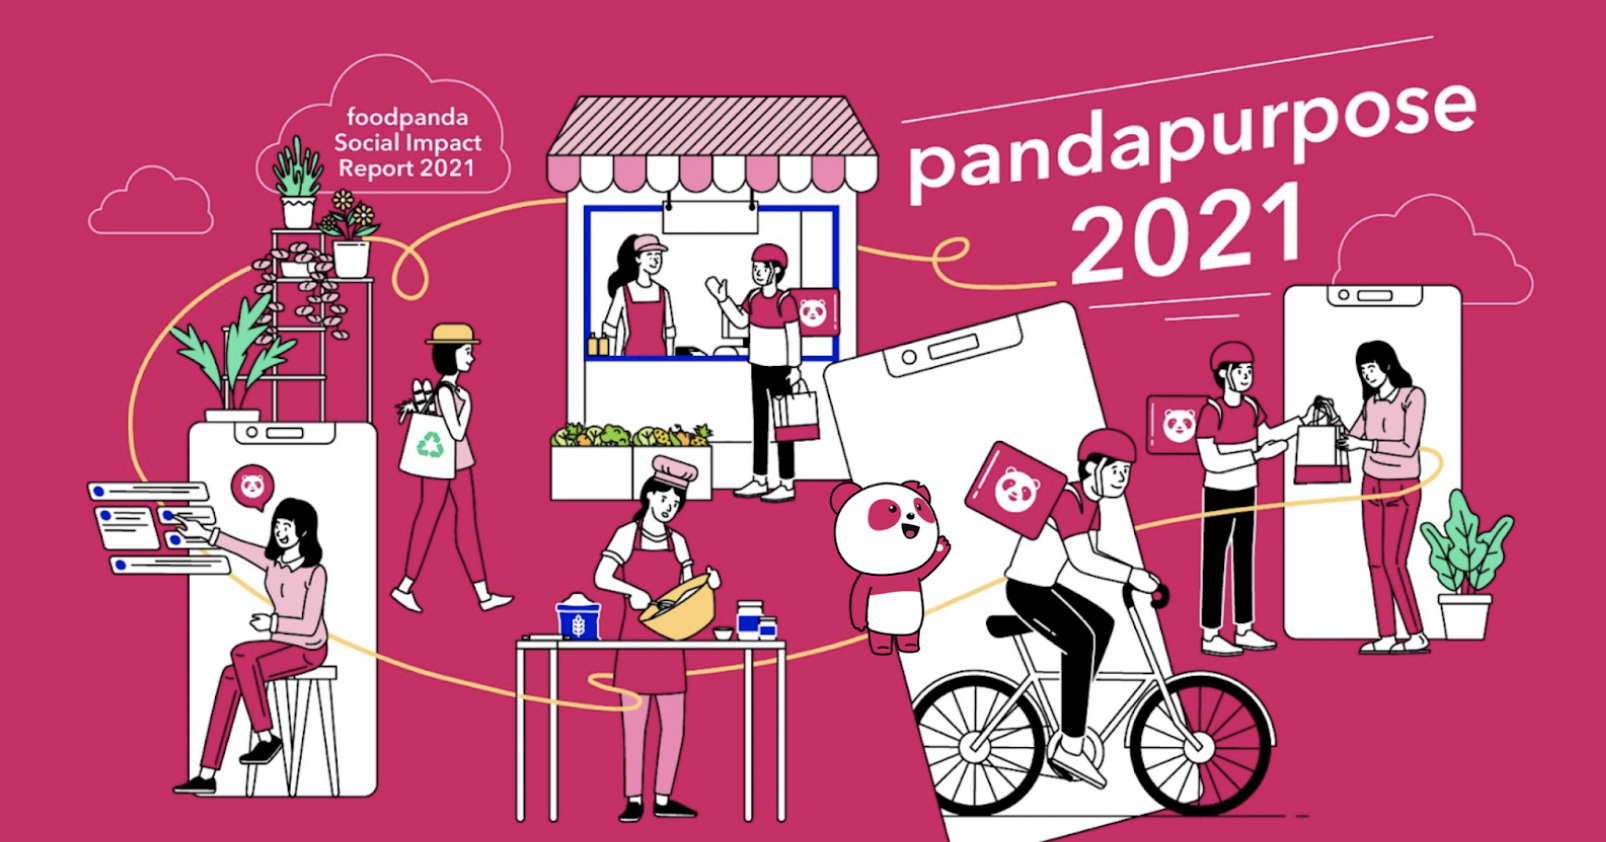 Image - foodpanda publishes inaugural Social Impact Report; dedicated over US$35 million to grow communities, digitalise MSMEs and support riders in Asia